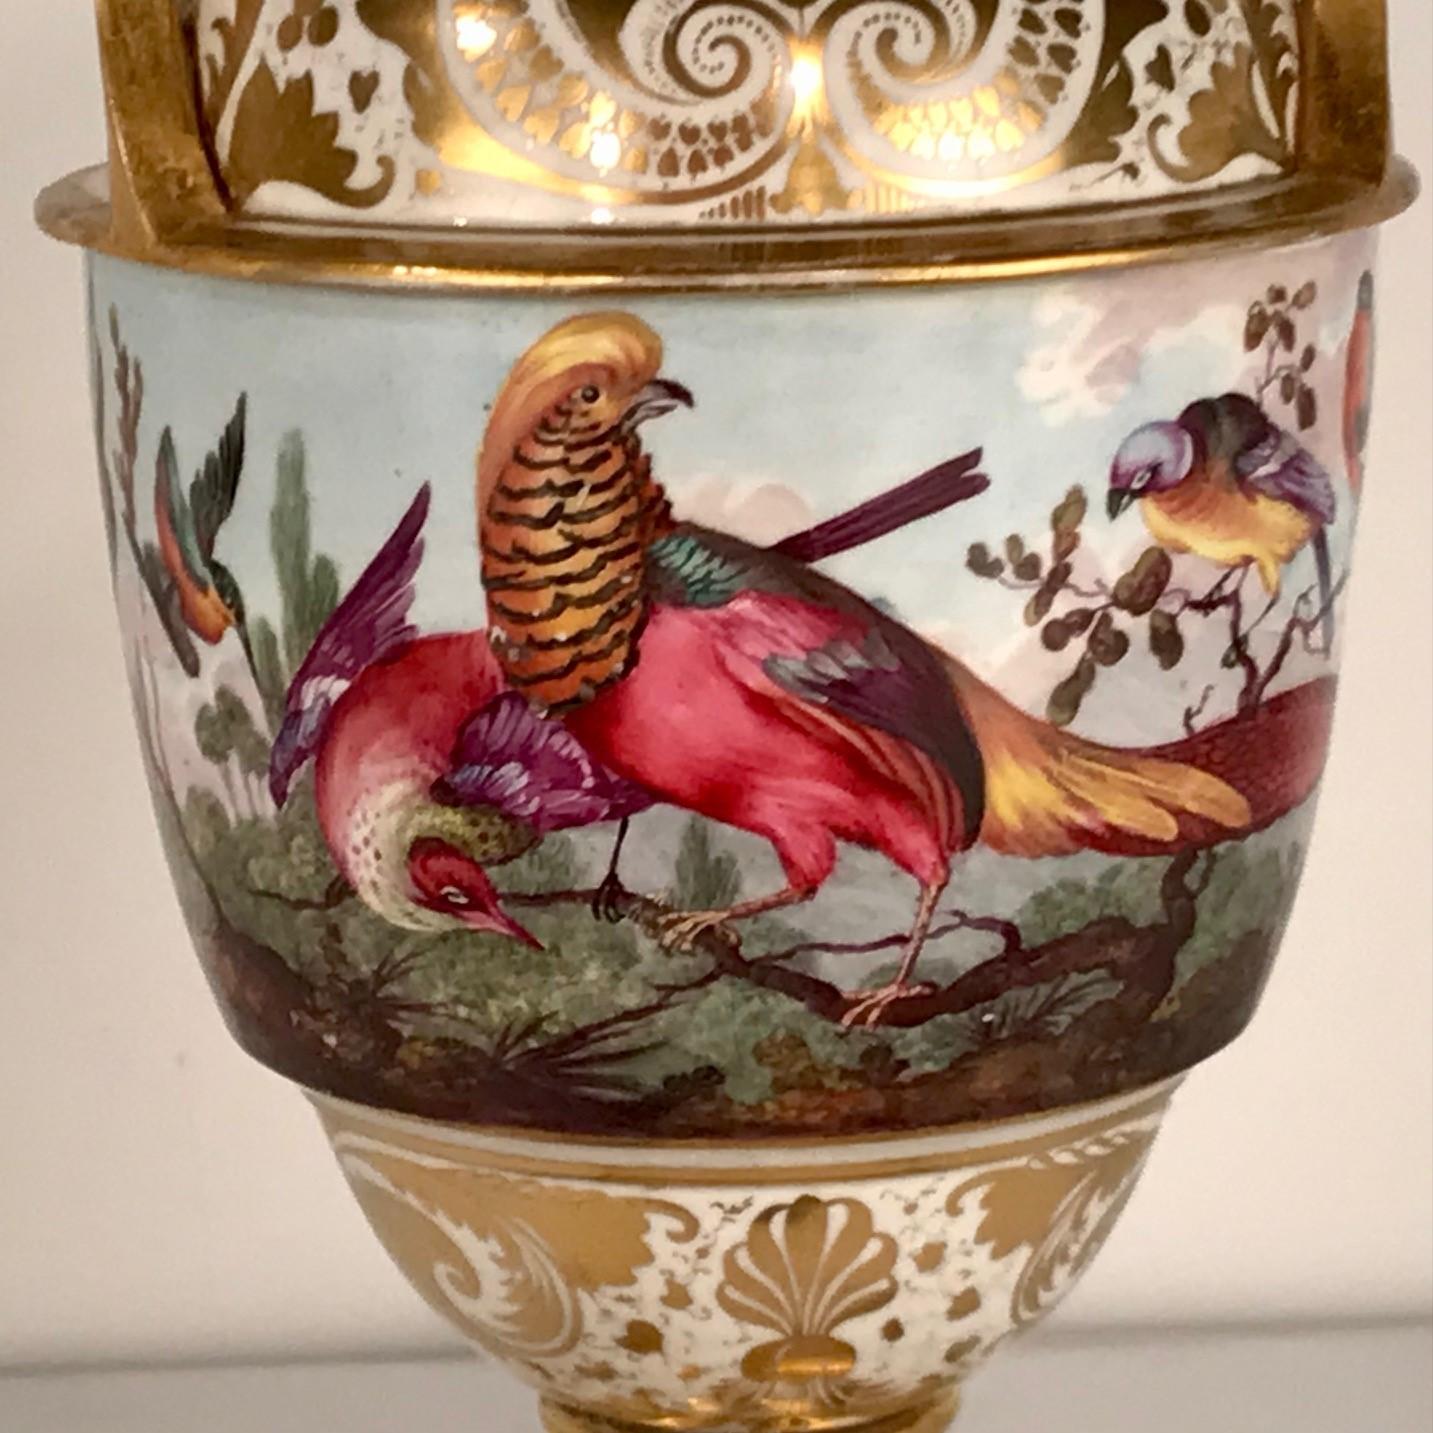 Samson Porcelain Ornithological Vase In Good Condition For Sale In Montreal, QC